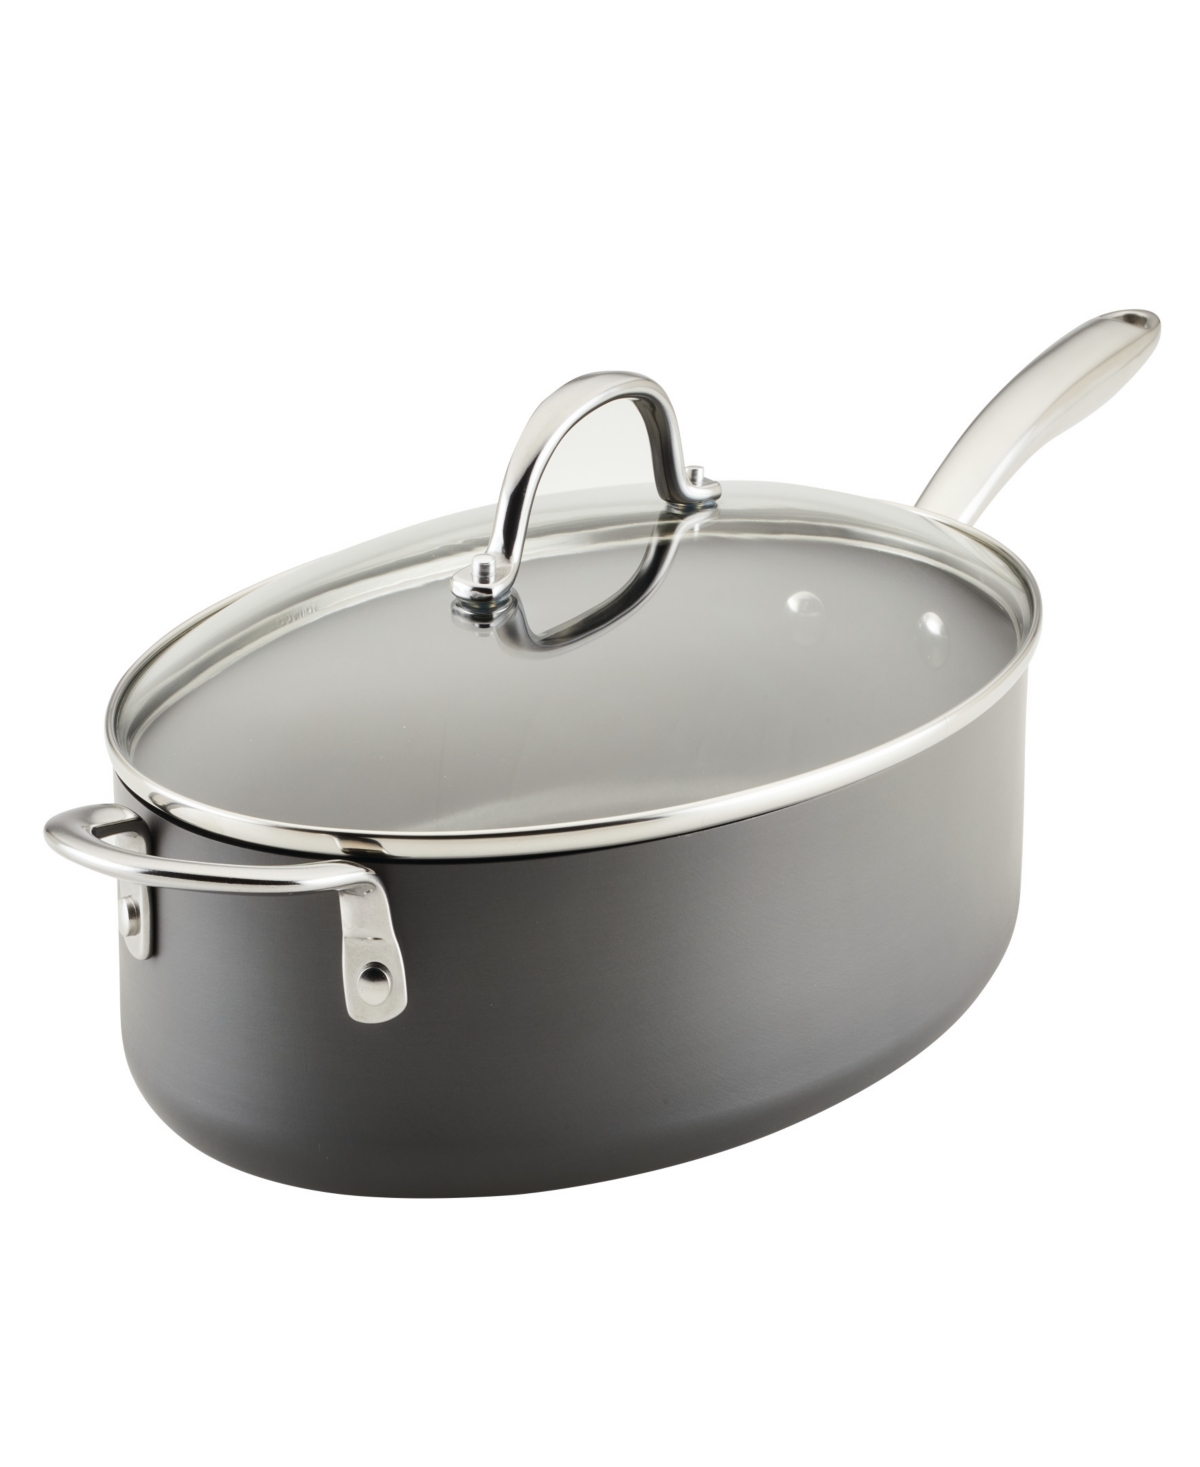 Rachael Ray Hard Anodized 5 Quart Nonstick Oval Saute Pan With Helper Handle And Lid In Gray